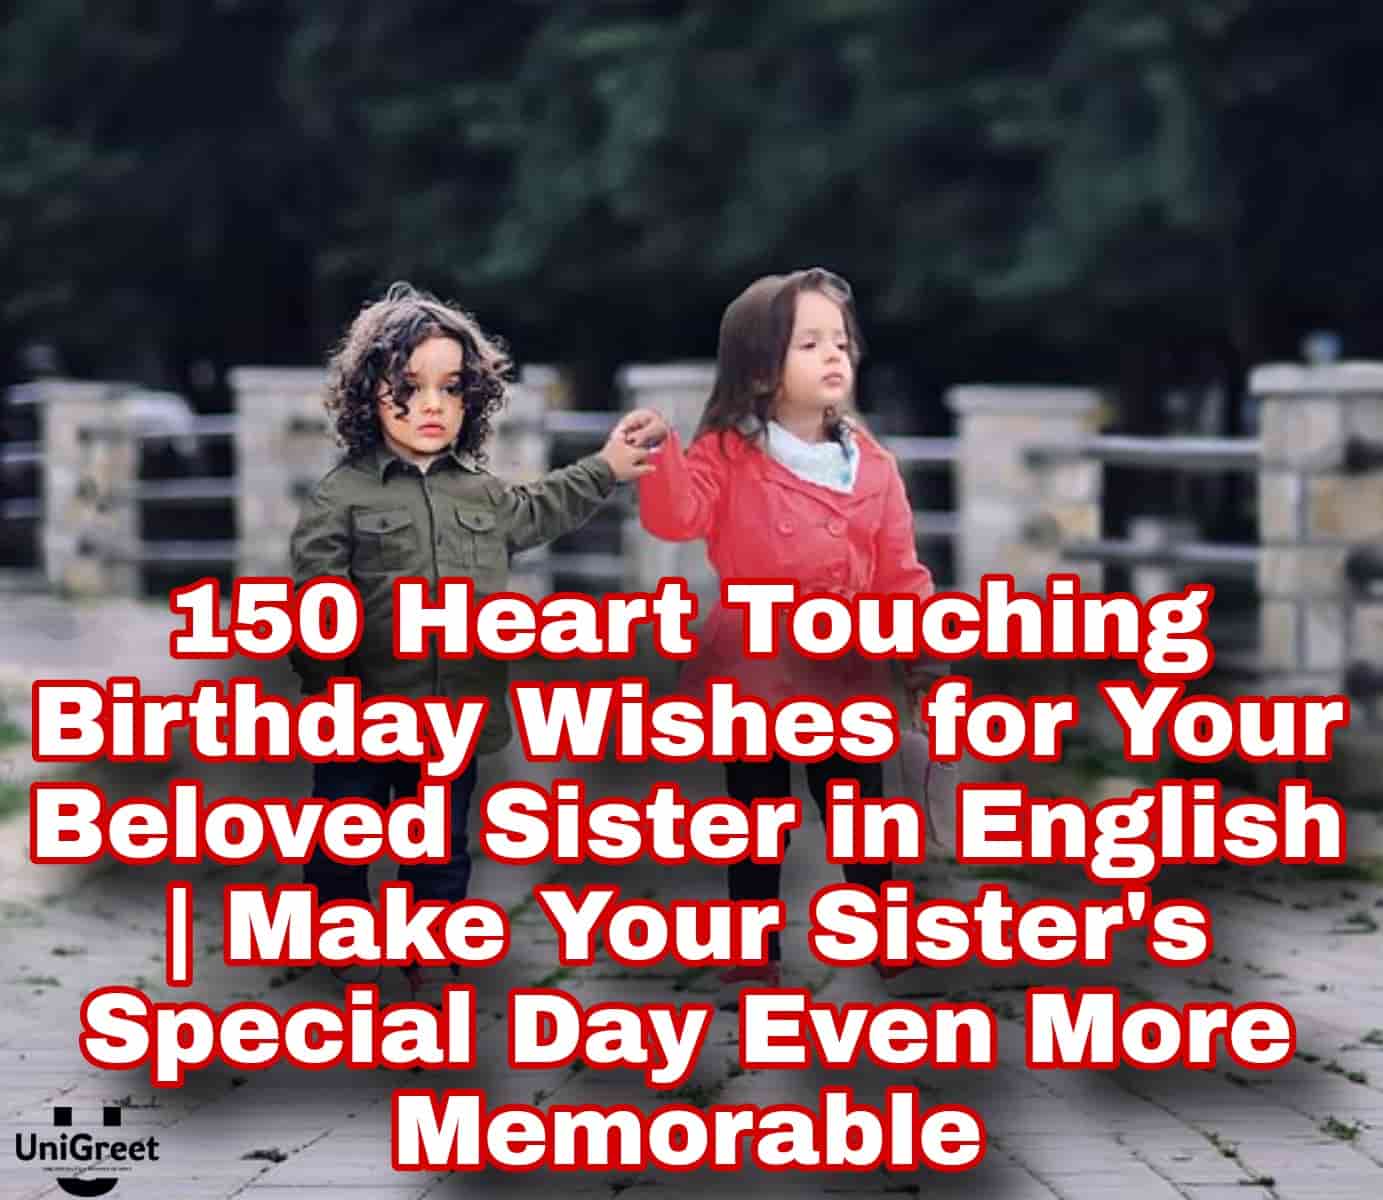 Heart touching birthday wishes for sister in english